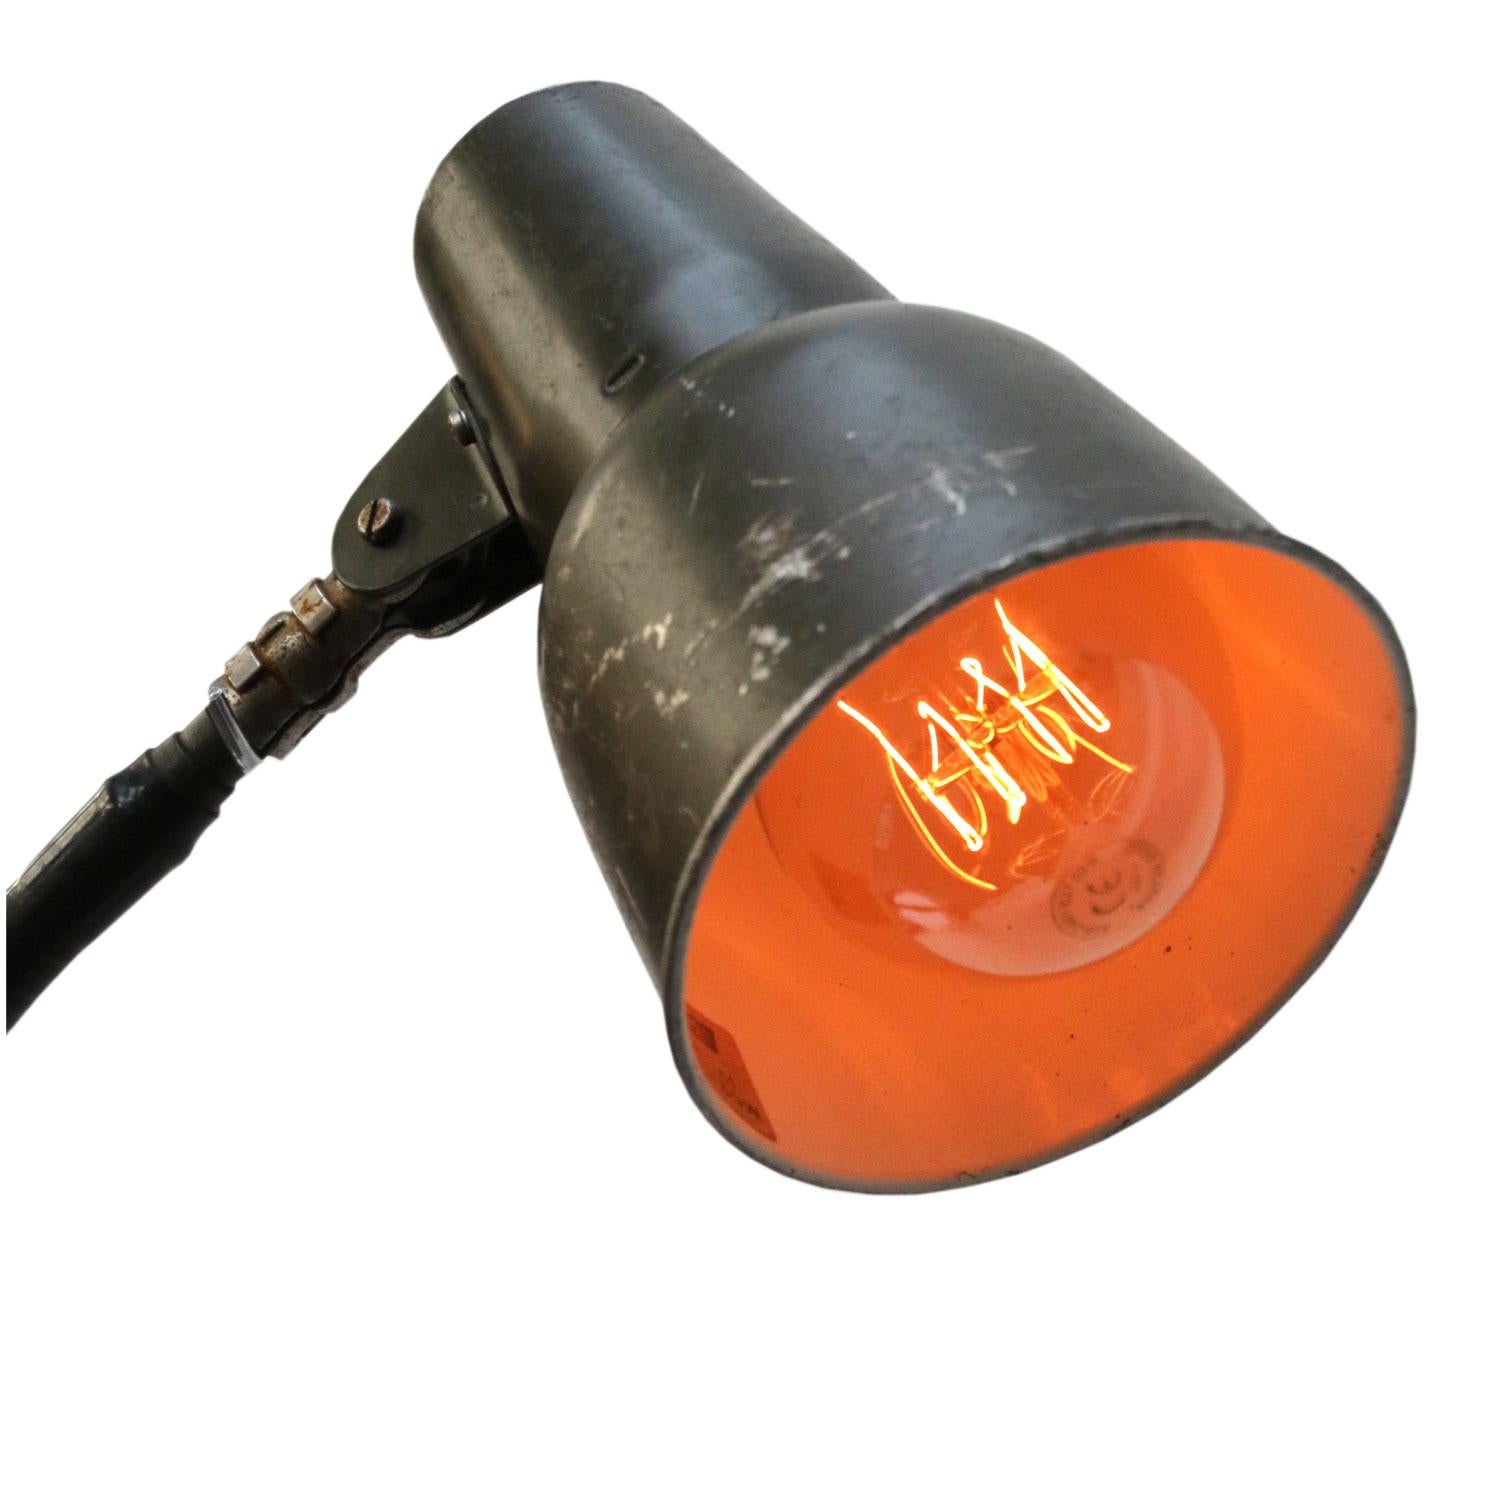 Metal work light with flexible arm.
Green aluminium shade.
On and of switch in top of shade.

Weight: 2.0 kg / 4.4 lb

All lamps have been made suitable by international standards for incandescent light bulbs, energy-efficient and LED bulbs.